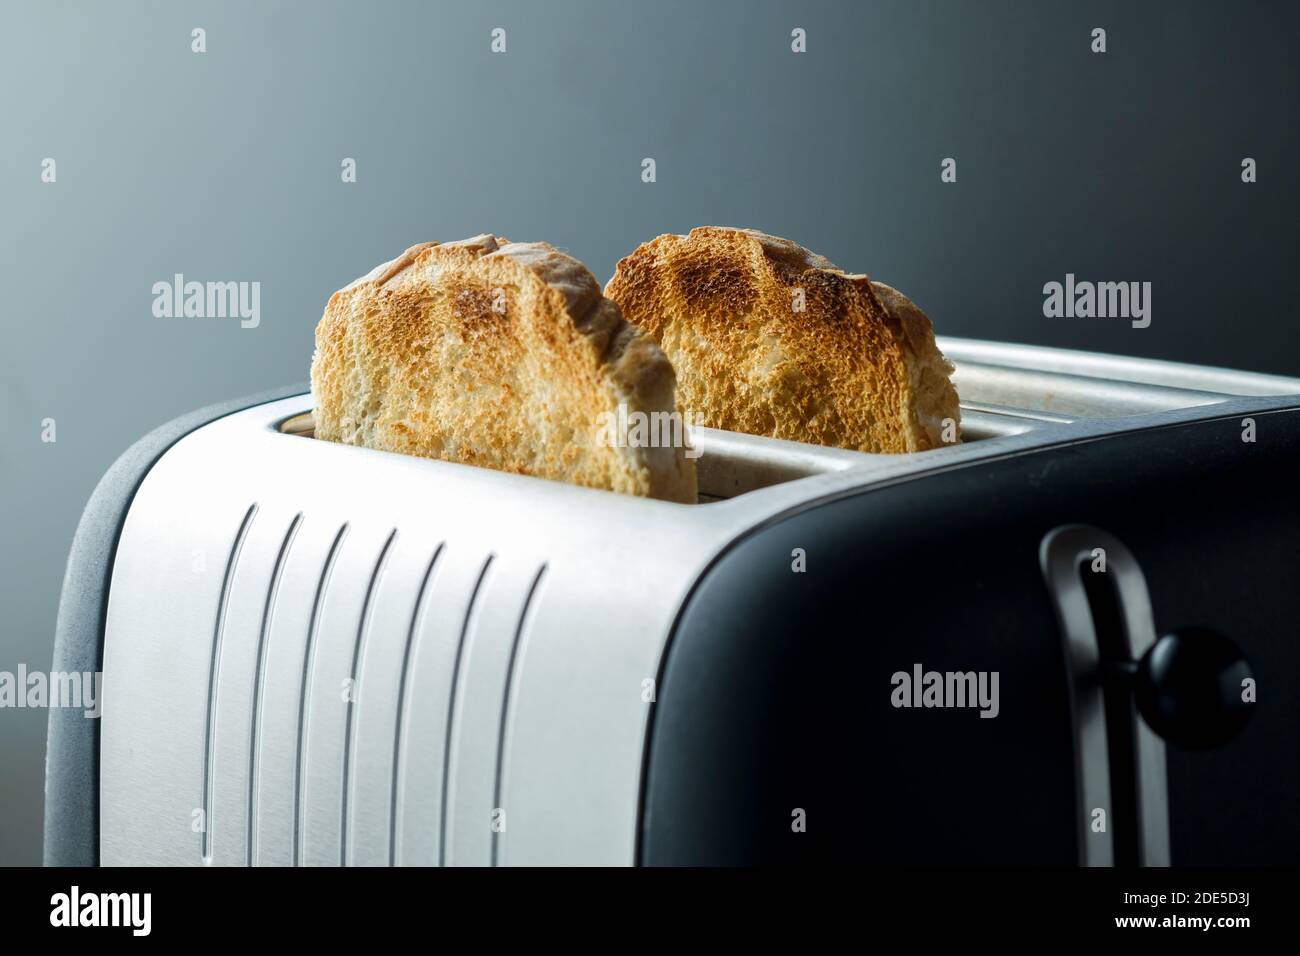 Freshly made toasted bread popped up in a modern toaster. The bread is browned and toasted ready to be eaten for breakfast Stock Photo